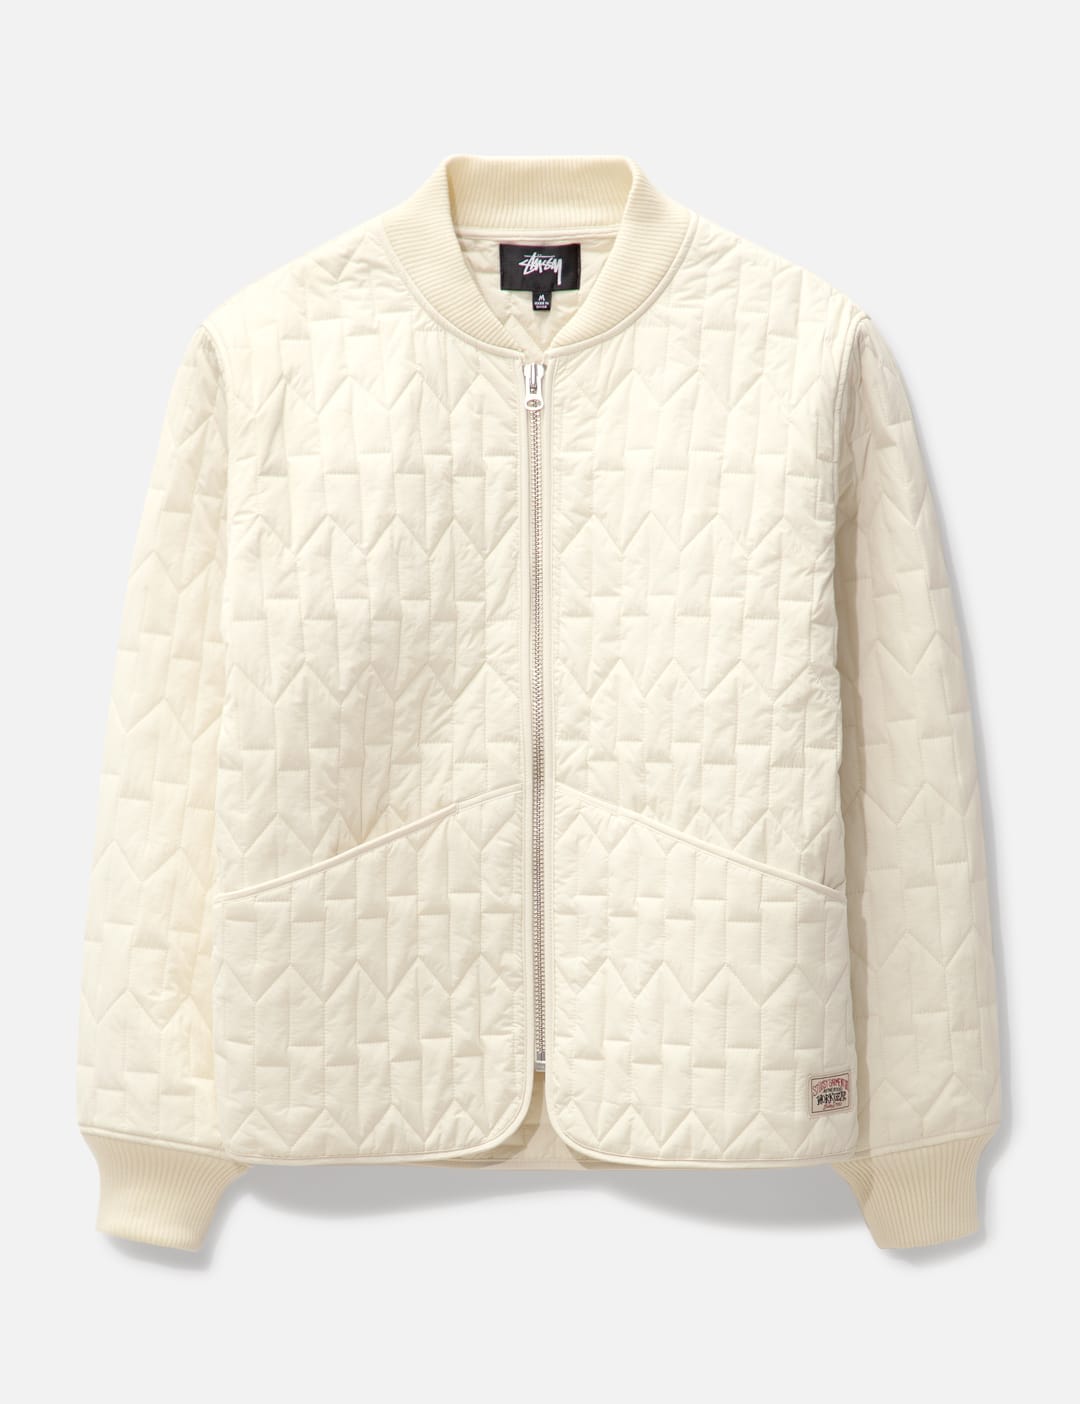 Stüssy   S Quilted Liner Jacket   HBX   Globally Curated Fashion